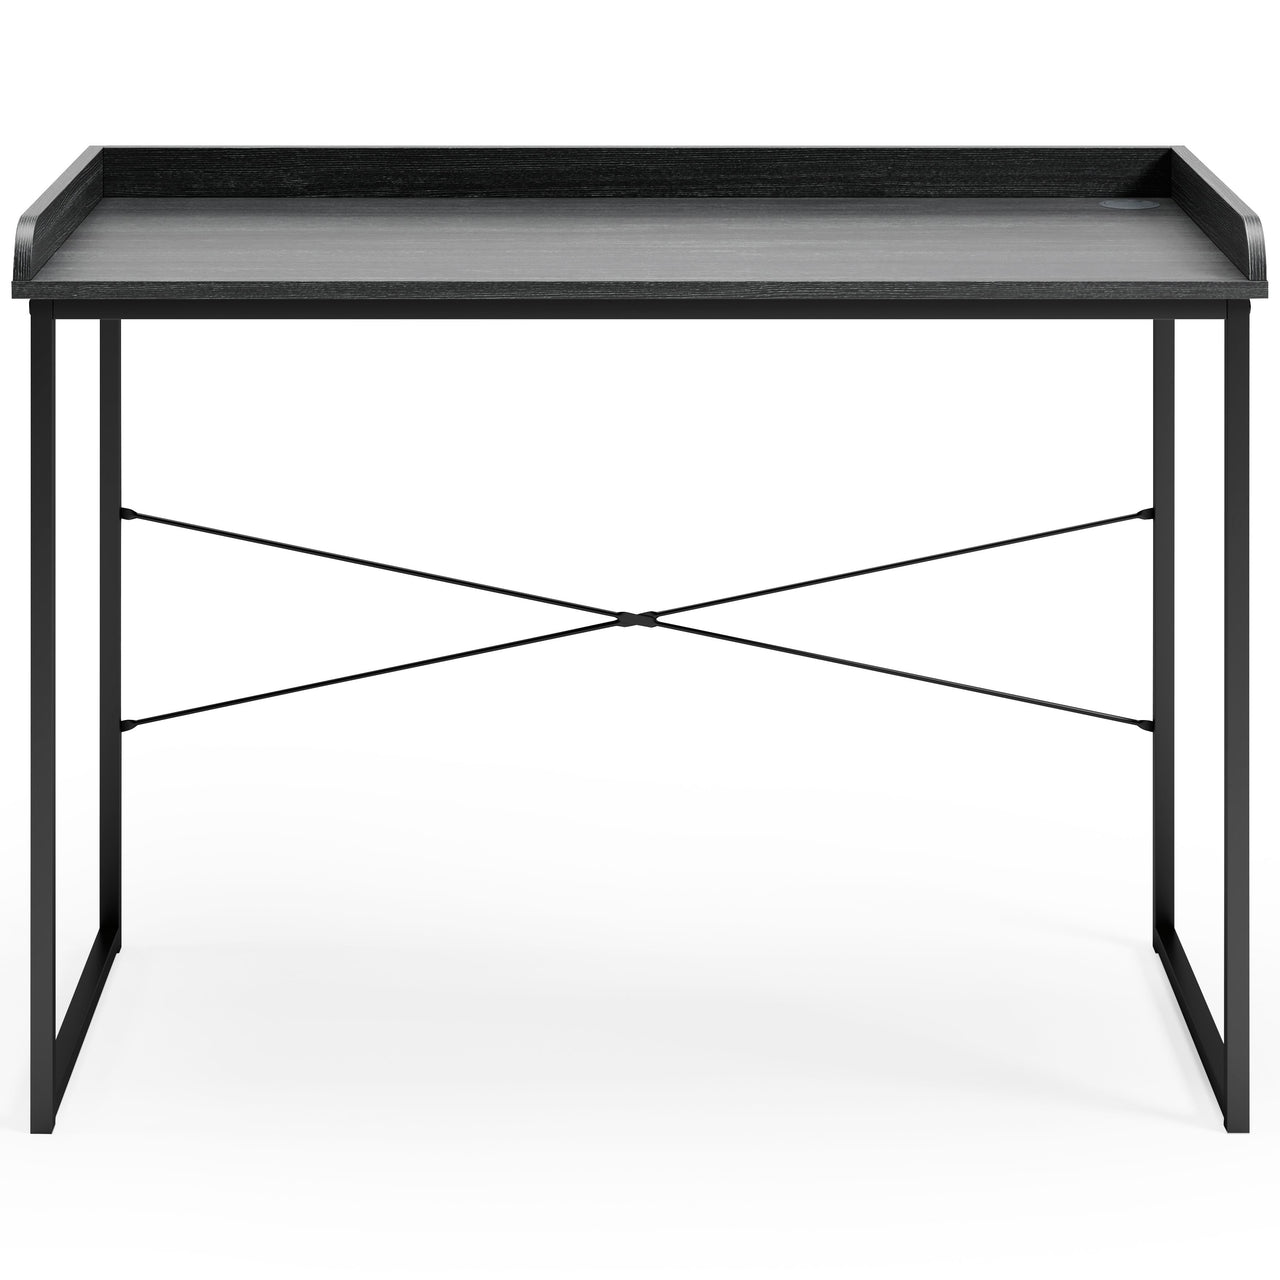 Yarlow - Black - Home Office Desk - Crossback - Tony's Home Furnishings